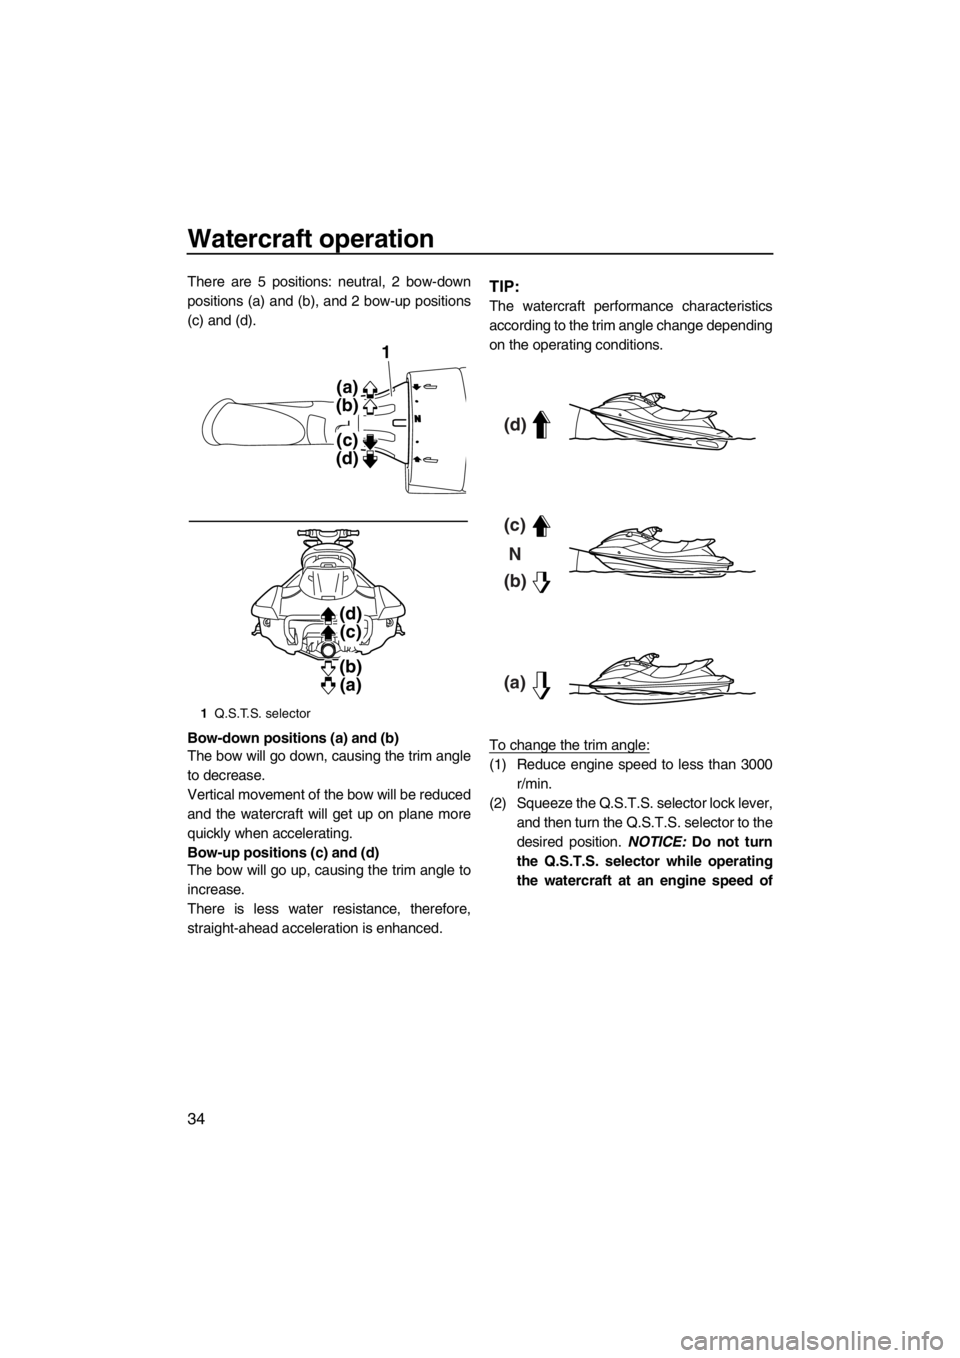 YAMAHA FX HO CRUISER 2012 Owners Guide Watercraft operation
34
There are 5 positions: neutral, 2 bow-down
positions (a) and (b), and 2 bow-up positions
(c) and (d).
Bow-down positions (a) and (b)
The bow will go down, causing the trim angl